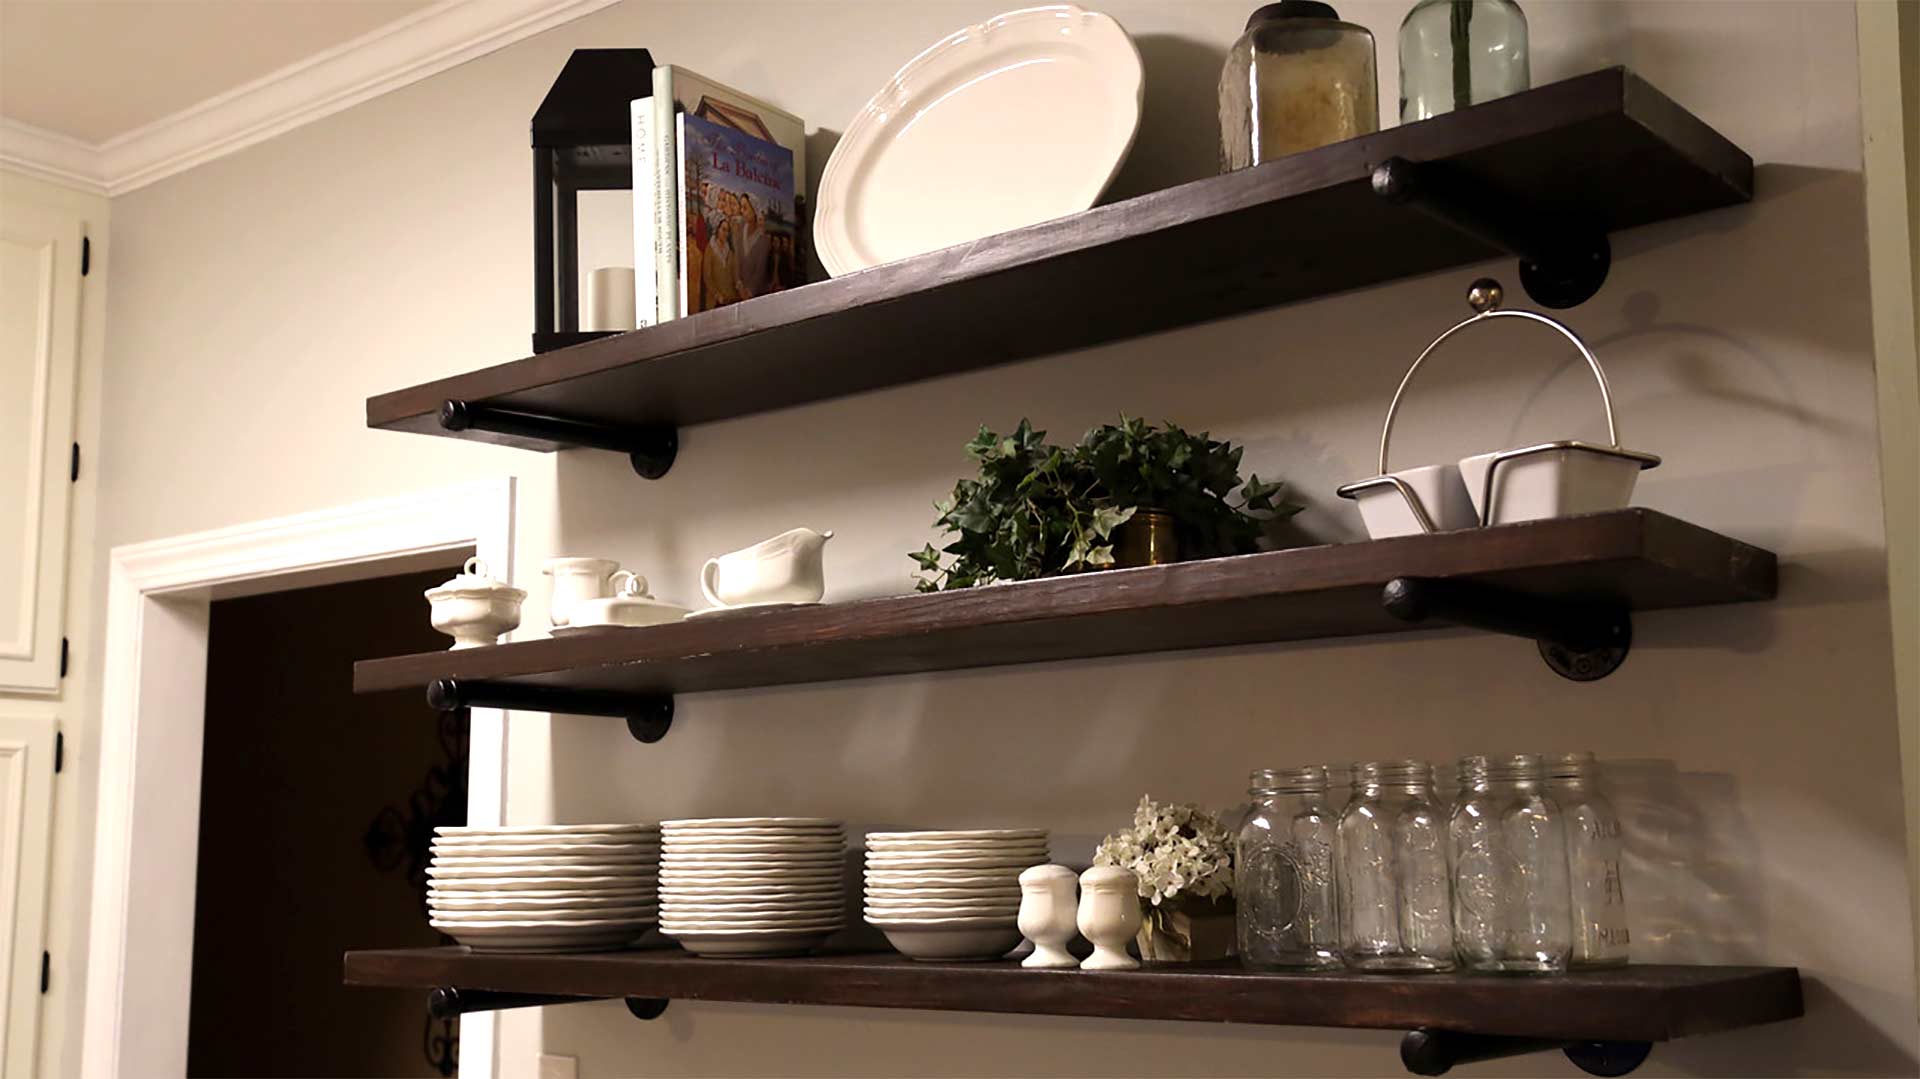 Open shelving in a kitchen